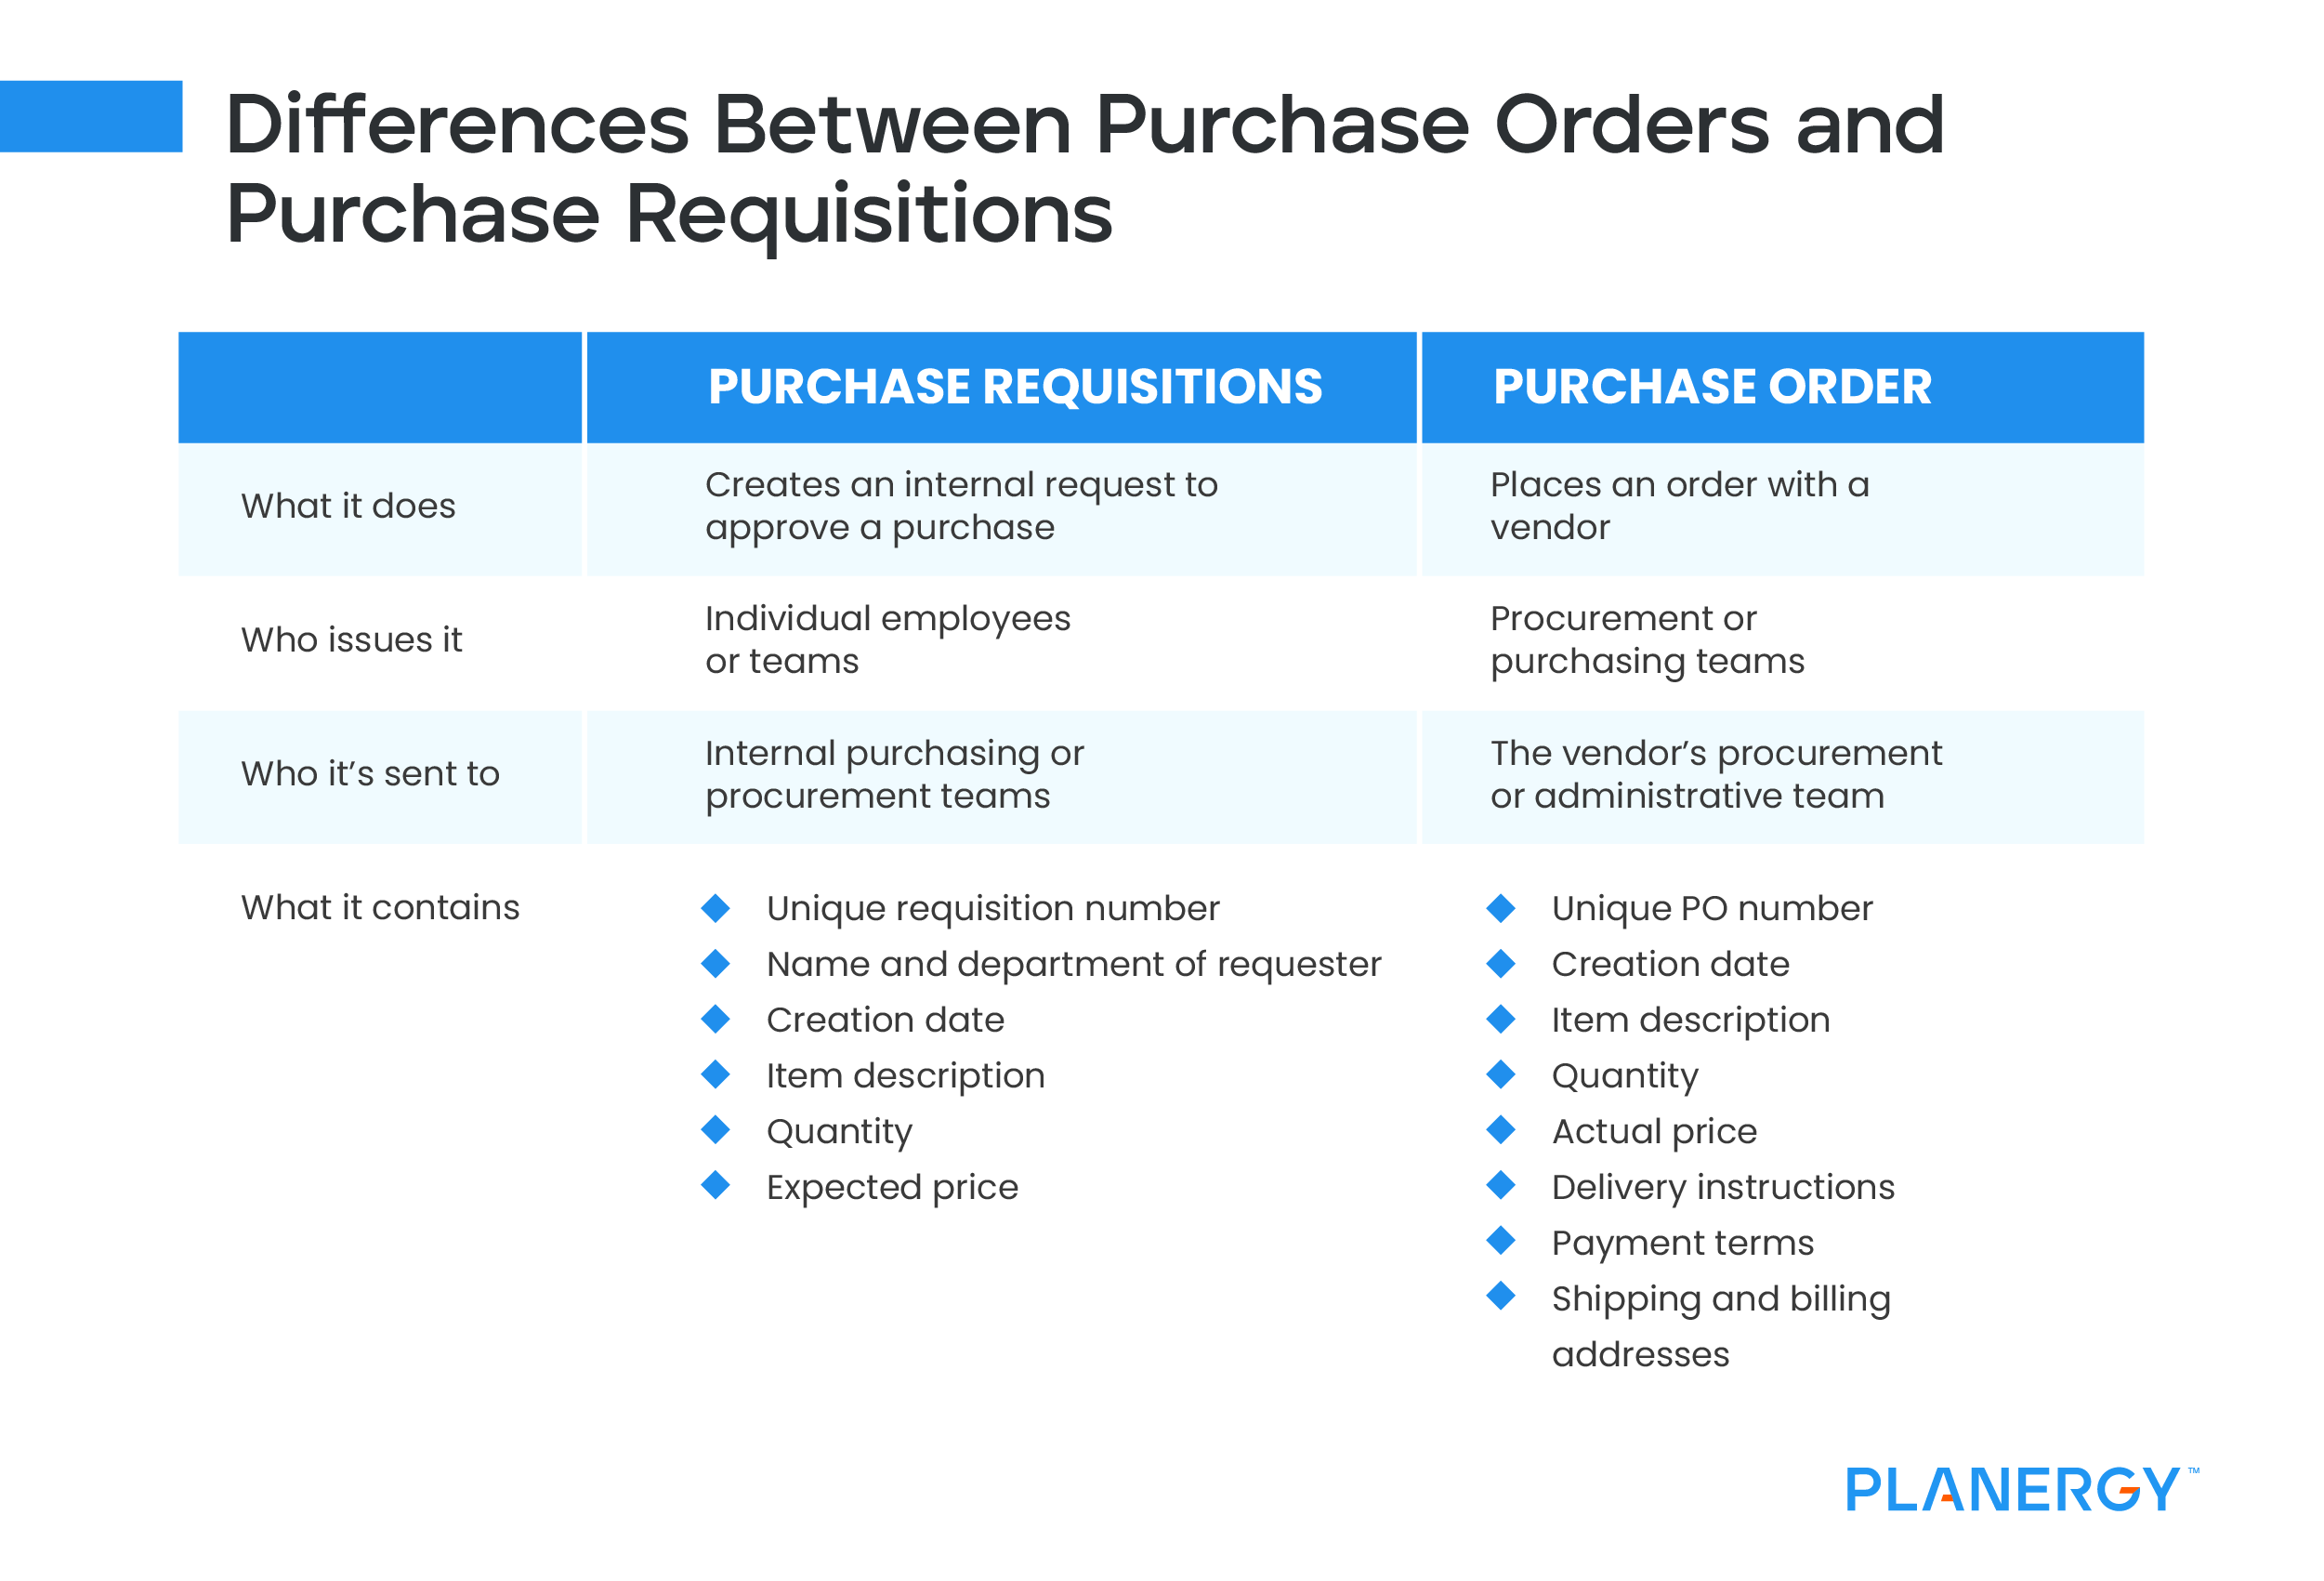 Differences Between Purchase Orders and Purchase Requisitions